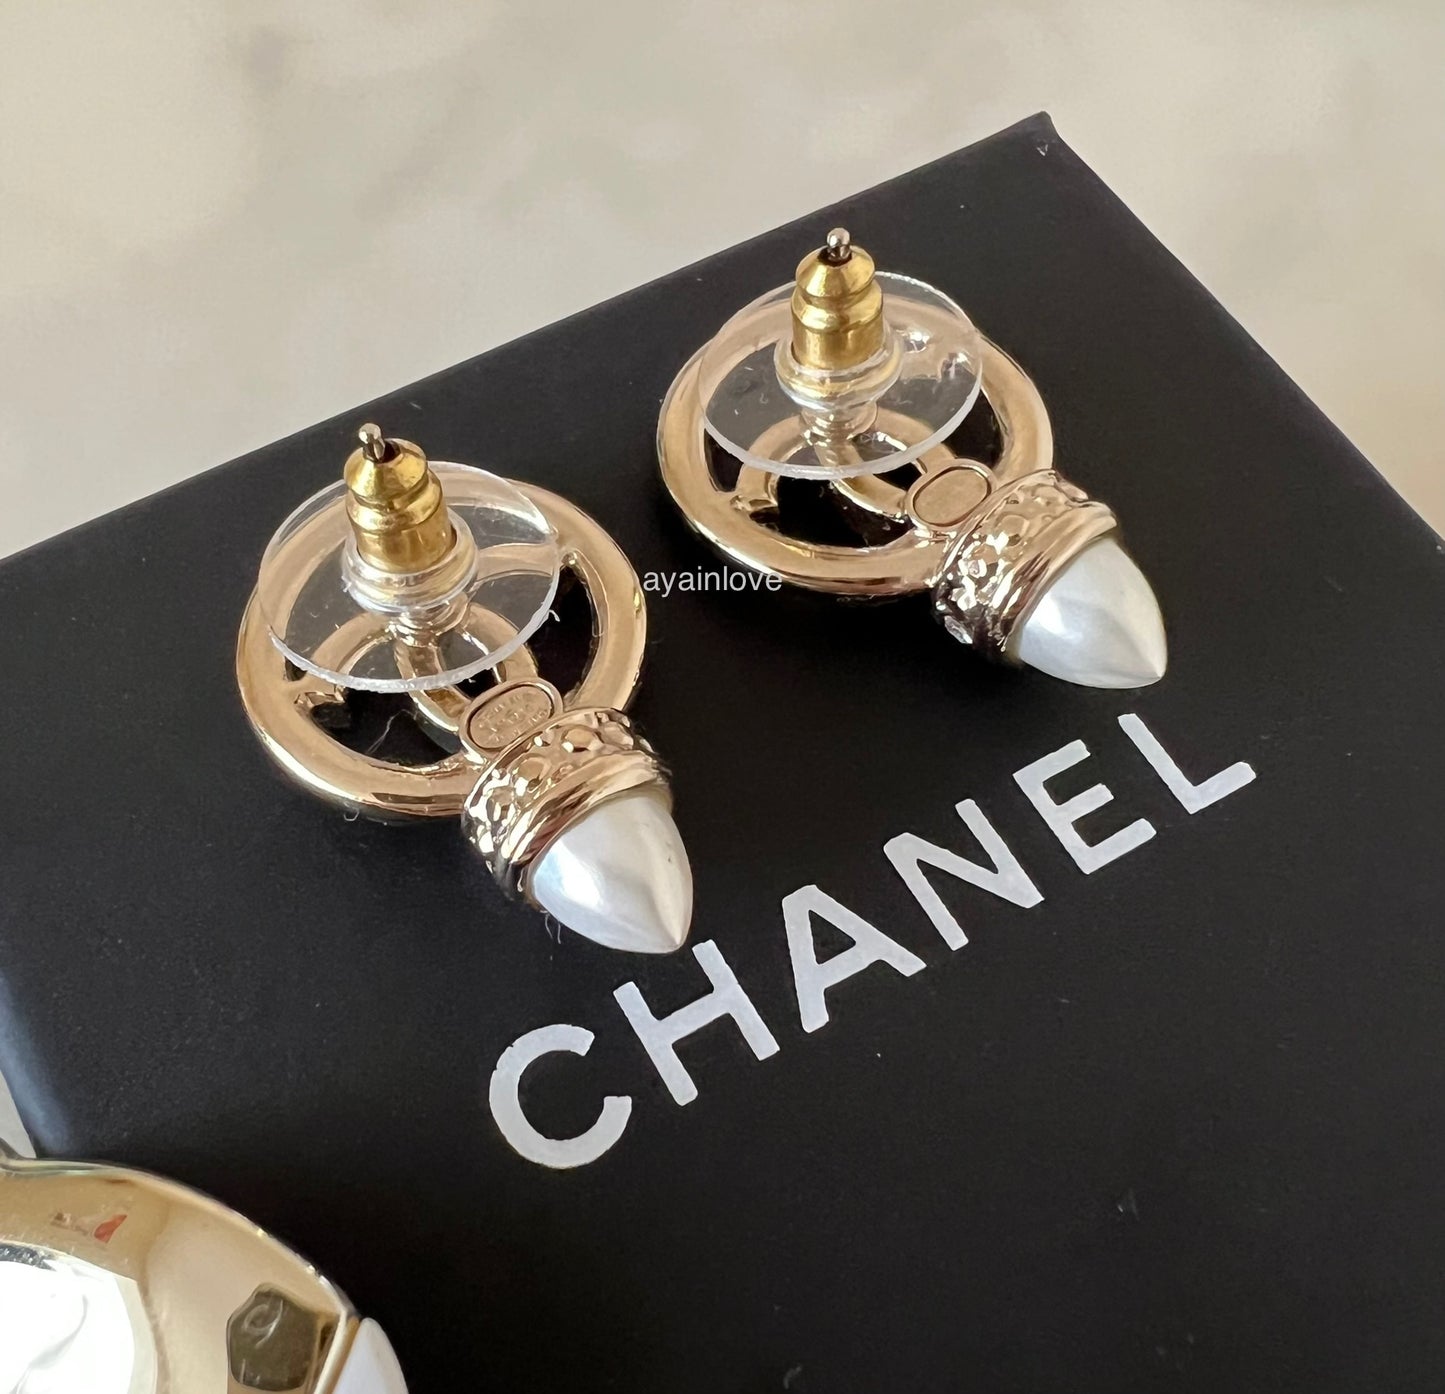 CHANEL 22C Round CC Crystal Stud Earrings Light Gold Hardware